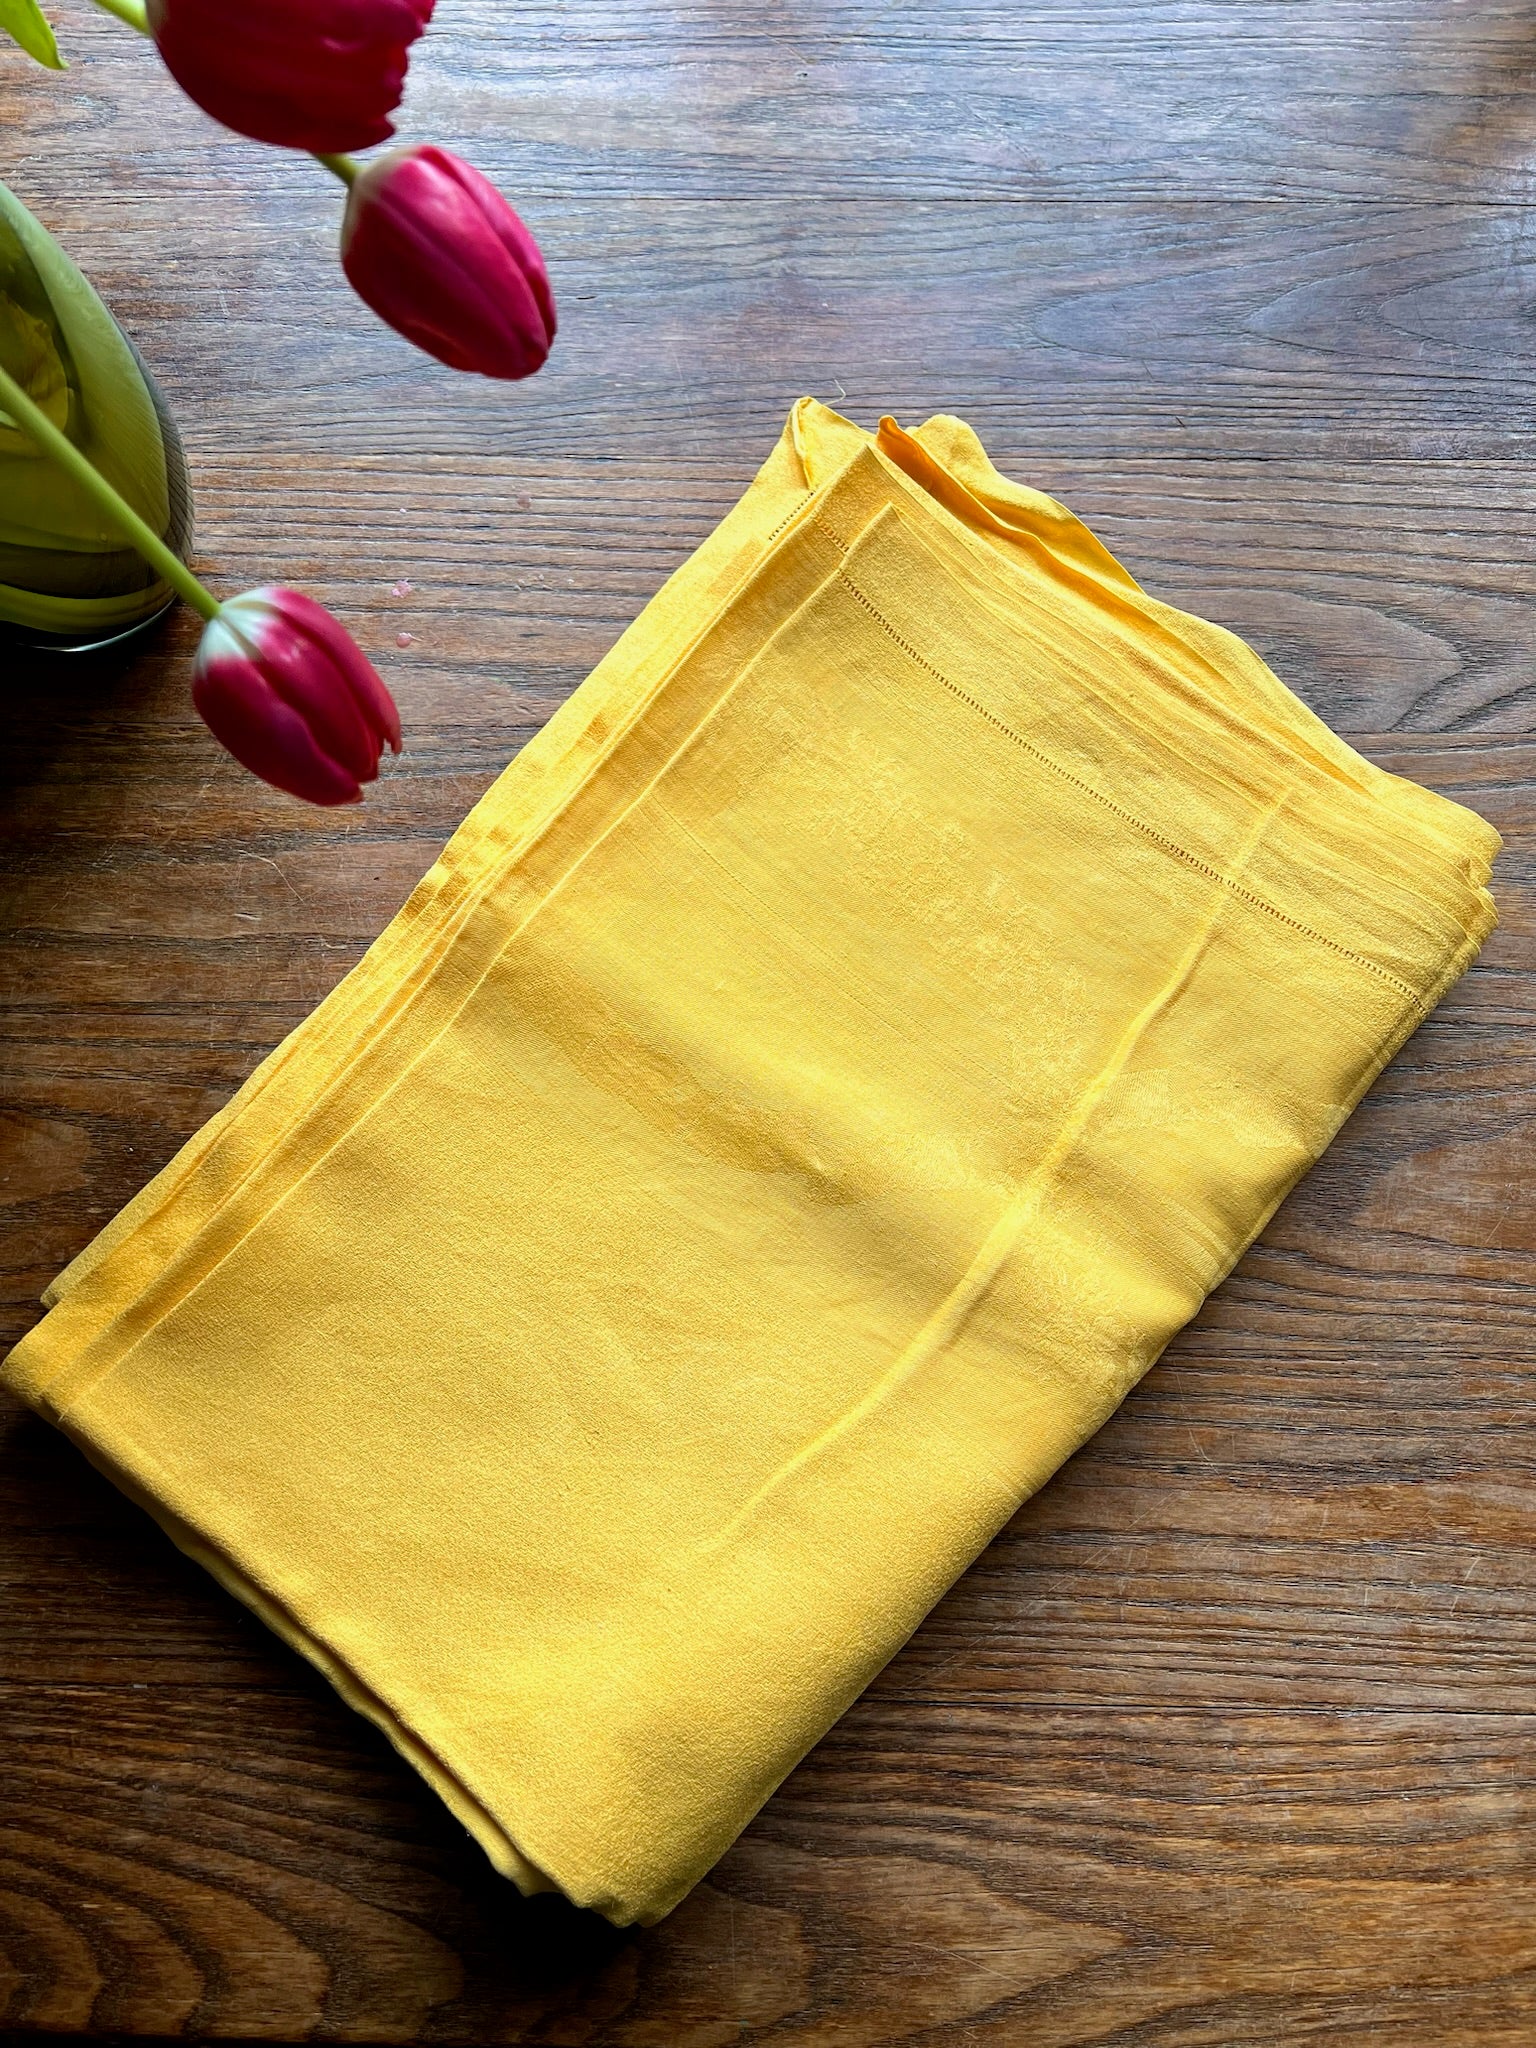 Vintage French Yolk Yellow Linen Damask Tablecloth